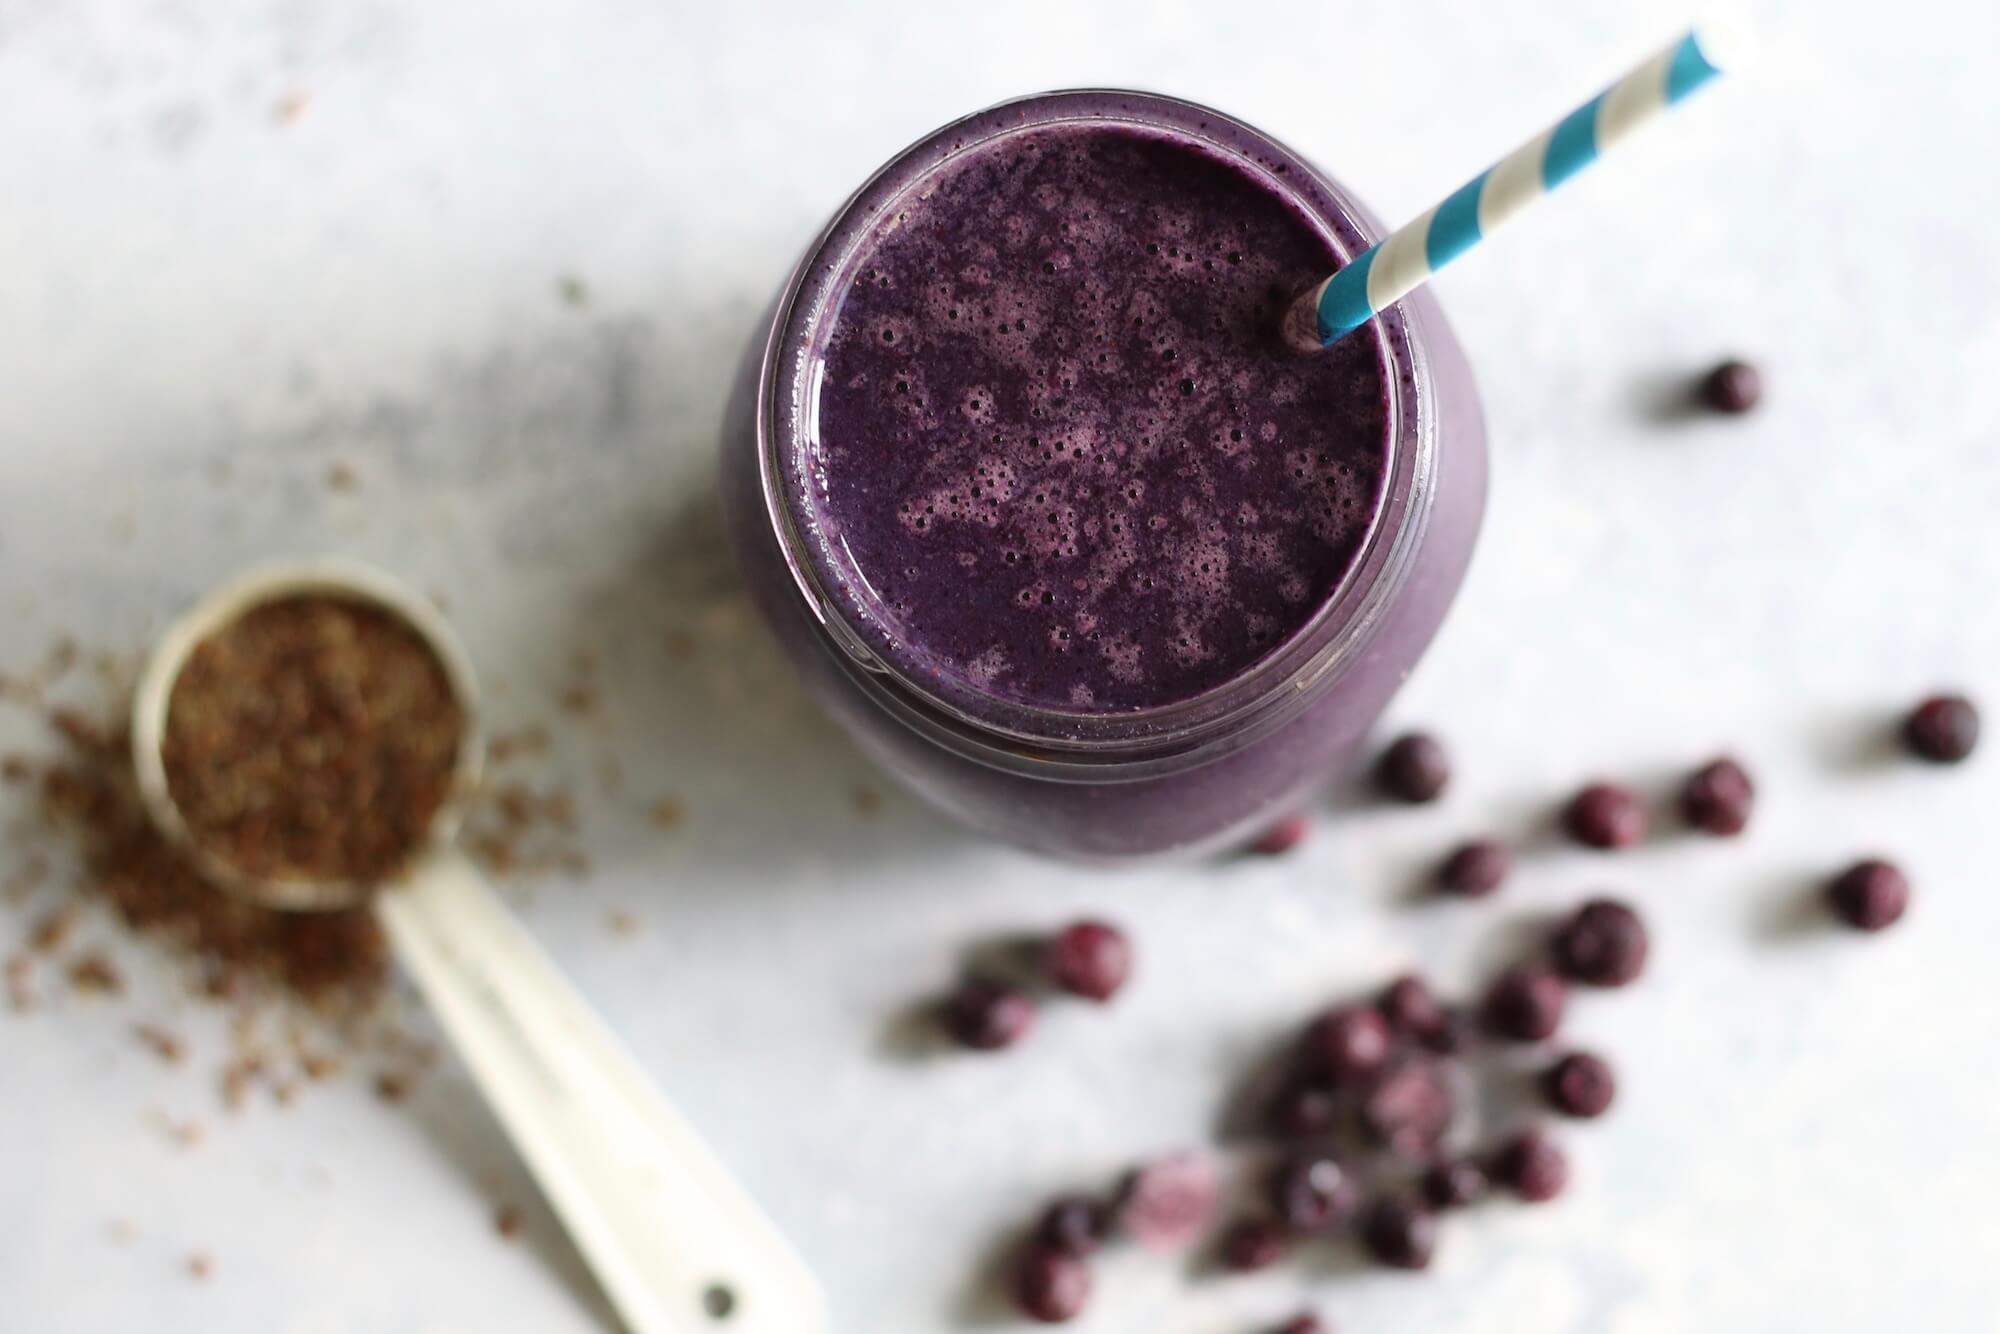 20 Meal Ideas to Support Student-Athletes: Blueberry Protein Smoothie